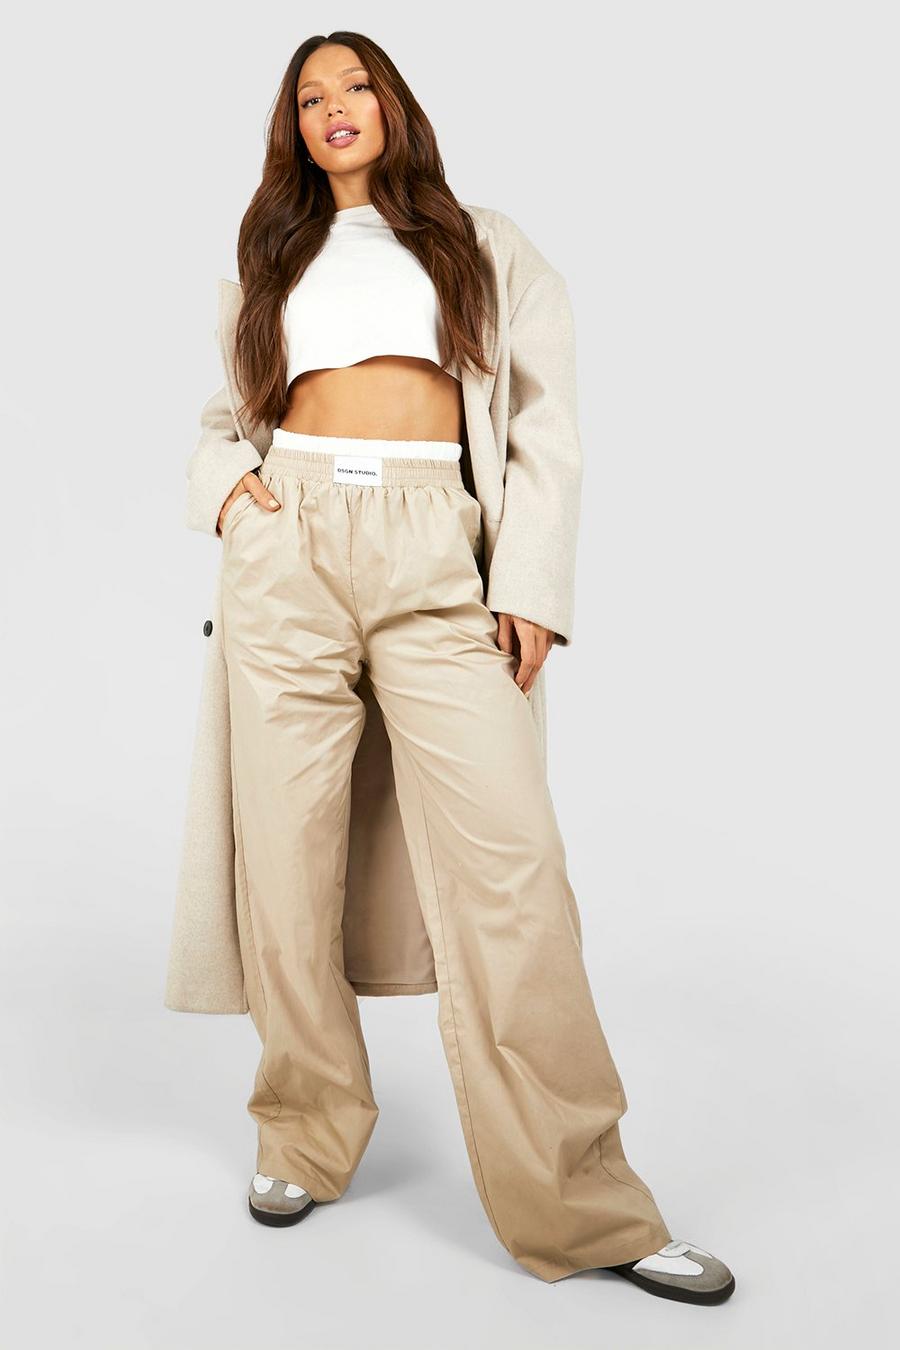 Stone Tall Contrast Waistband Detail Pants